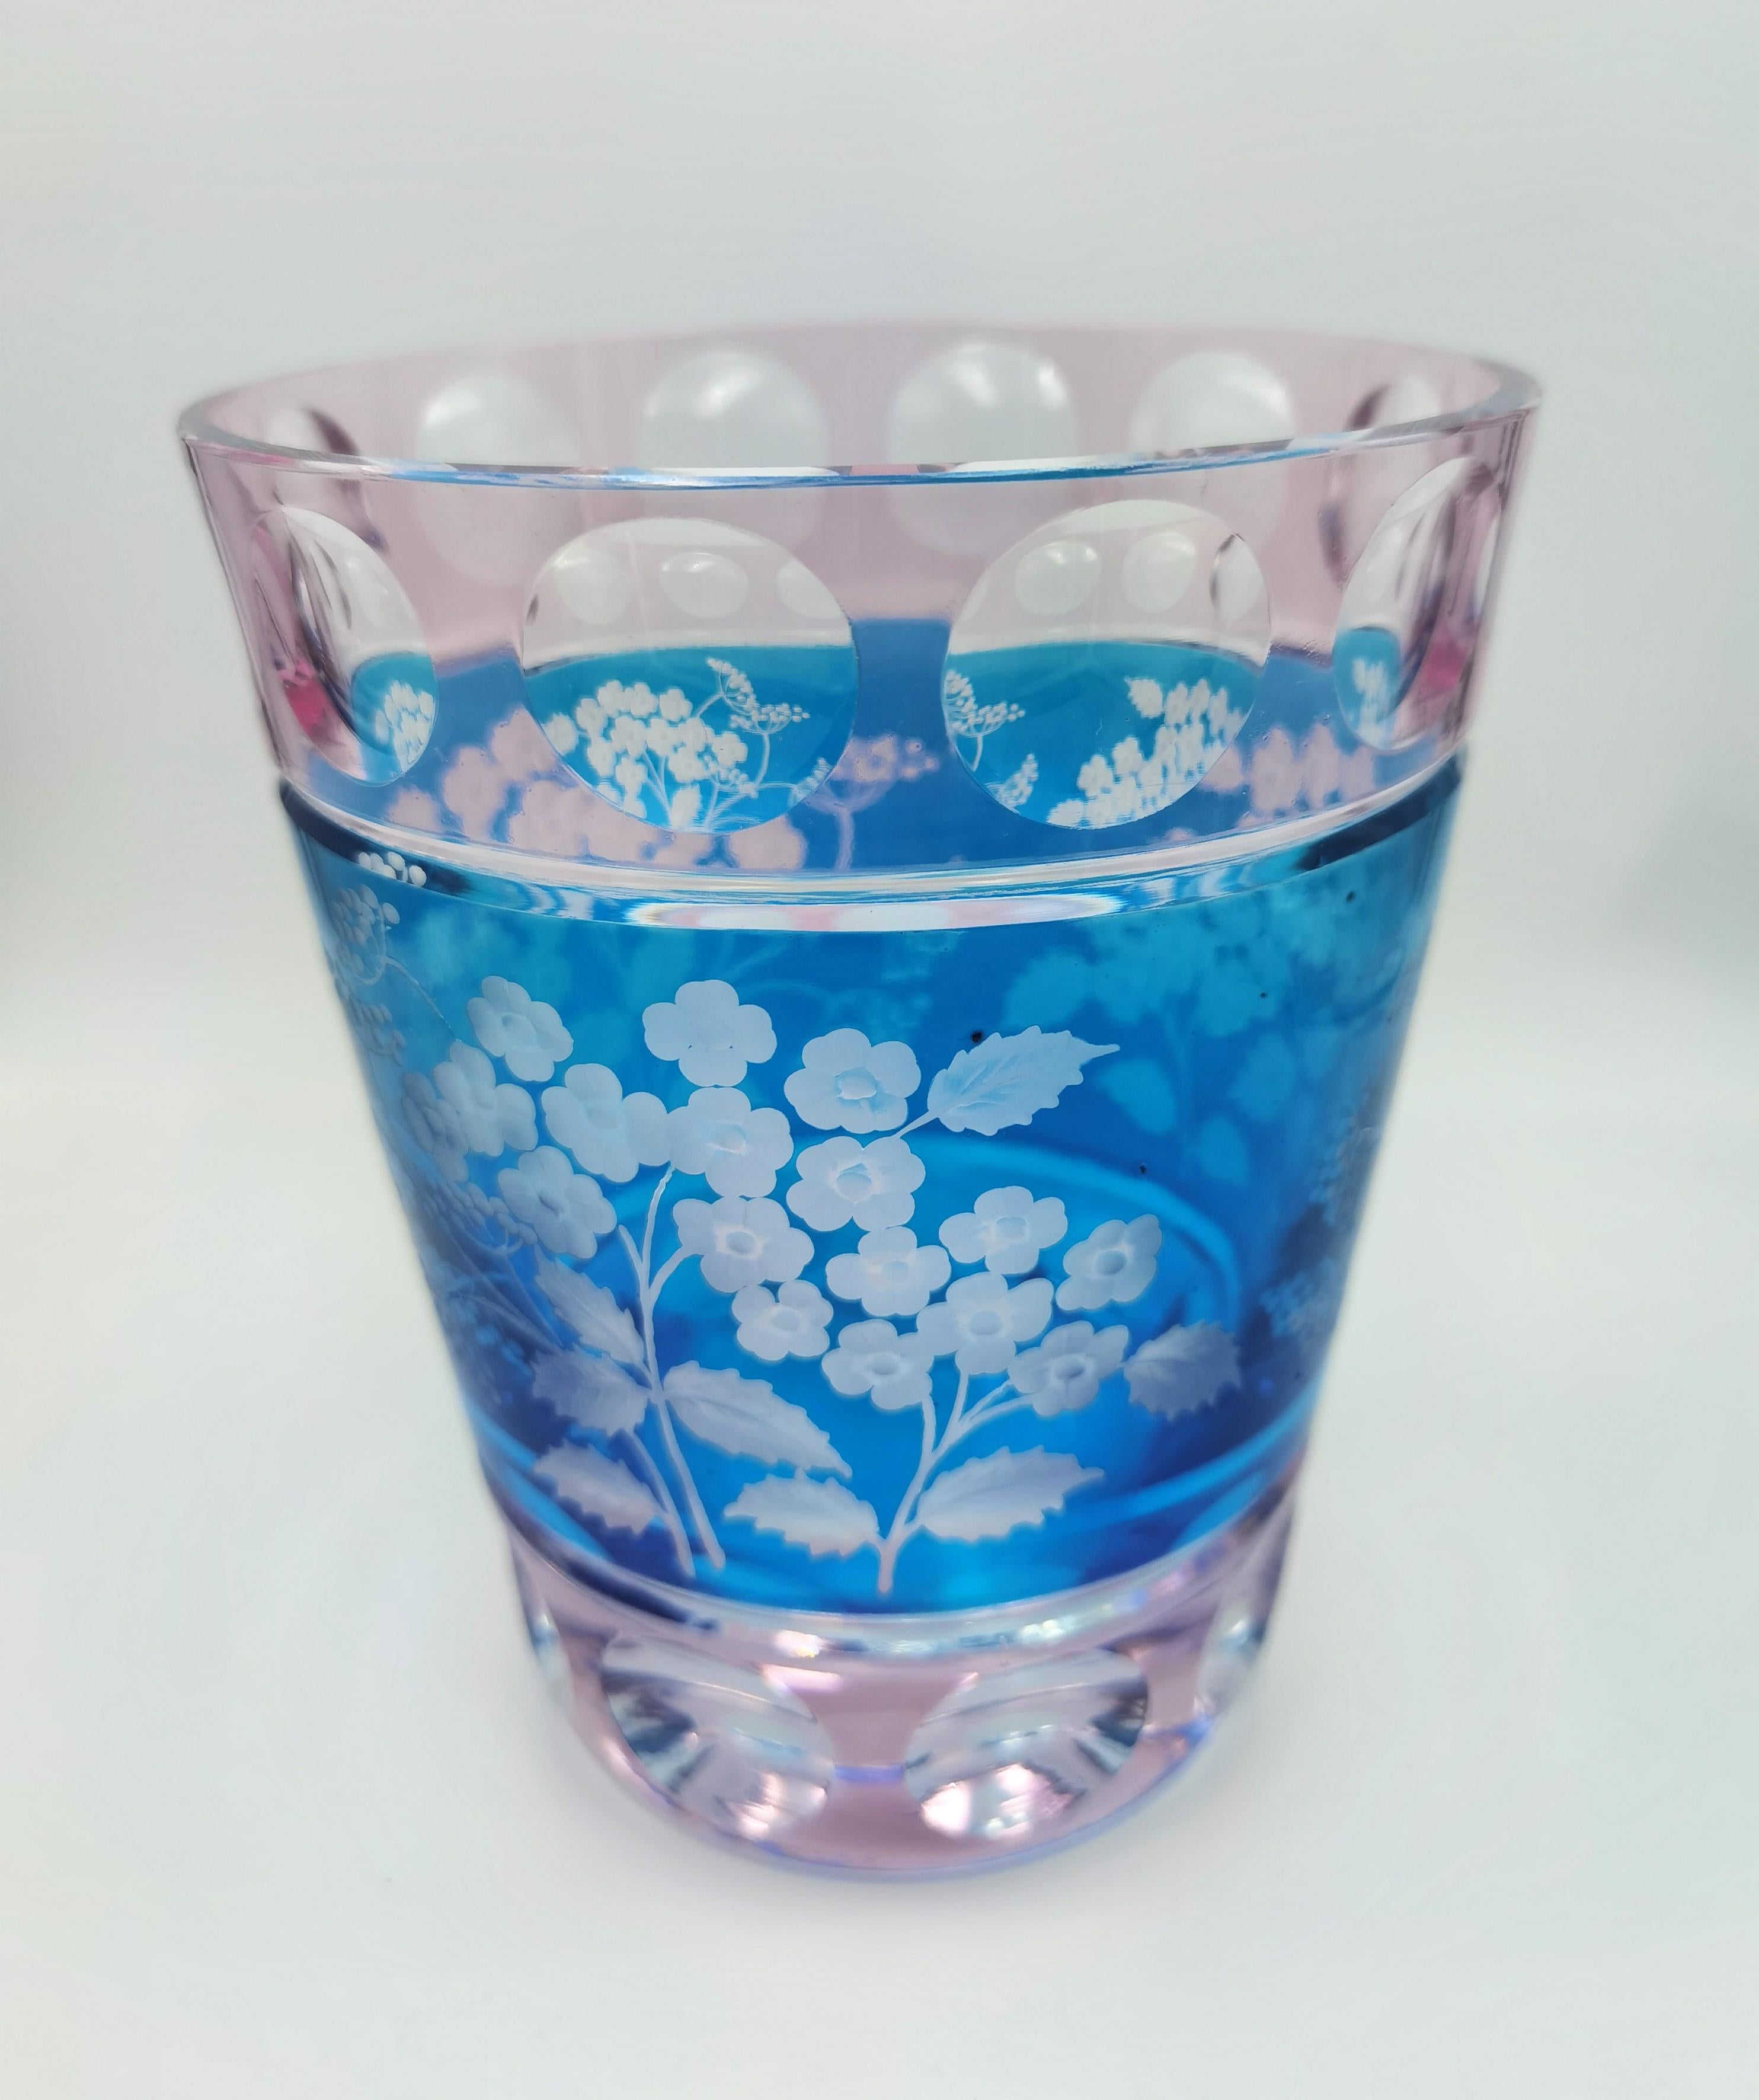 Hand blown crystal vase in 2 colors blue and pink with peonies all around the vase. The decor is hands-free engraved by glass artists in Bavaria by Sofina Boutique Kitzbuehel. Sofina glass and porcelain was found 2013 in Bavaria and lies a reversion